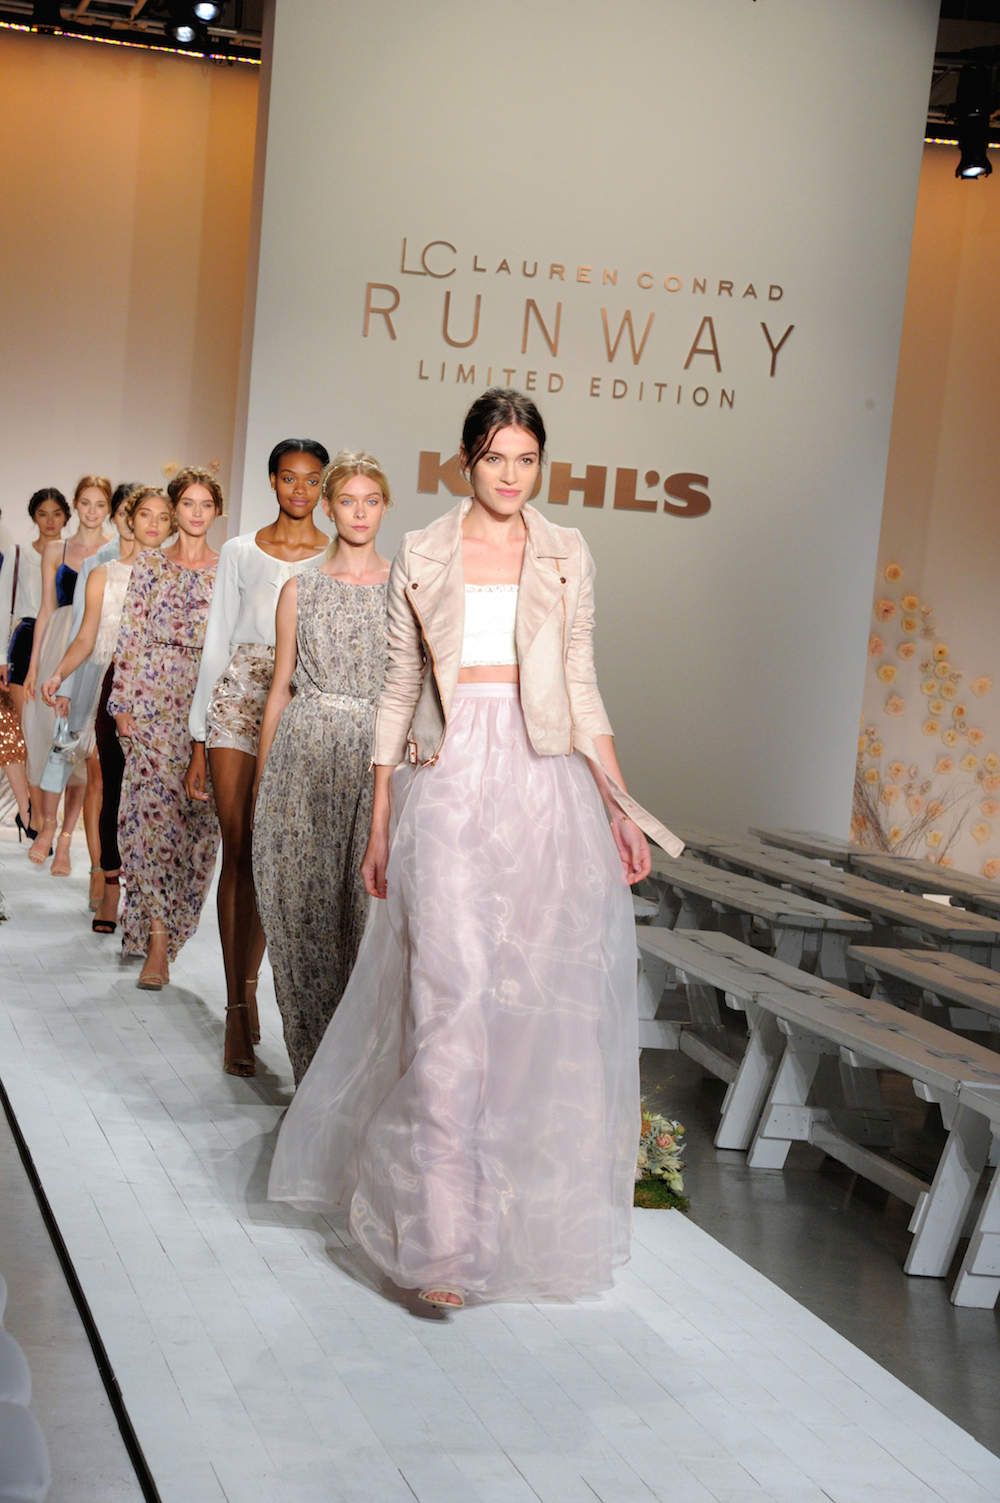 LC Lauren Conrad Runway Collection for Kohl's Fashion Week Show